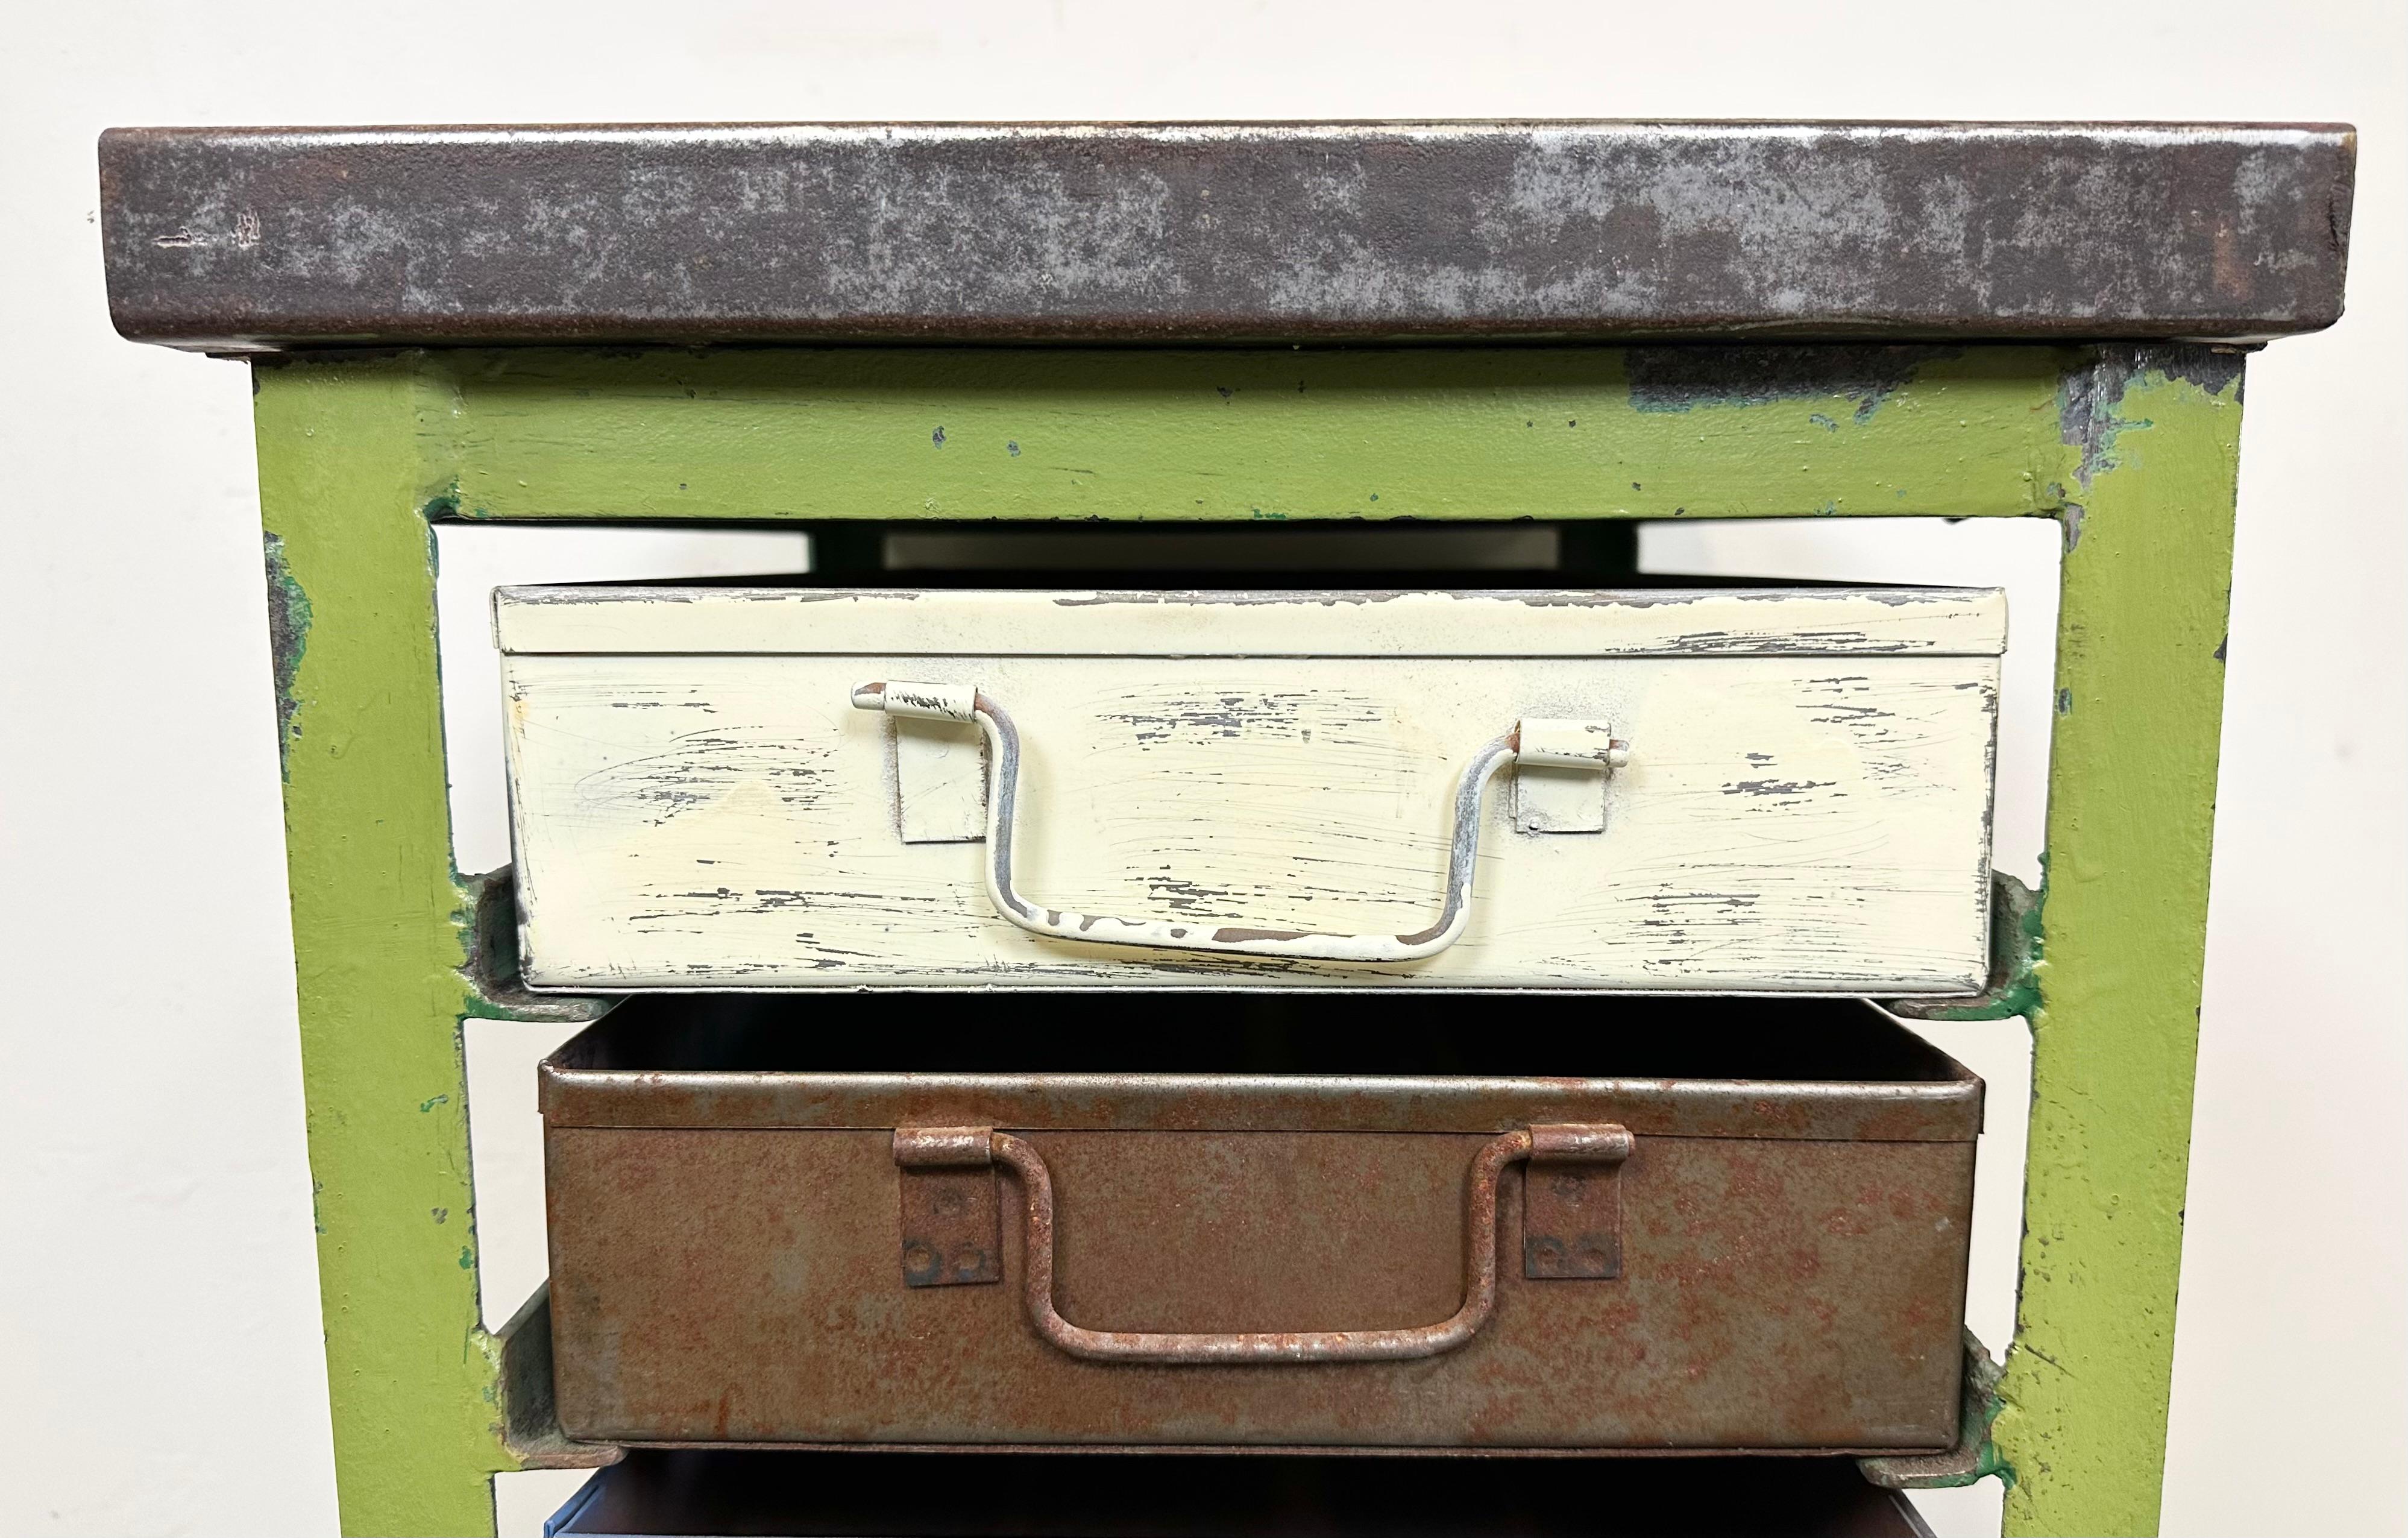 Vintage Green Industrial Iron Chest of Drawers, 1950s 5